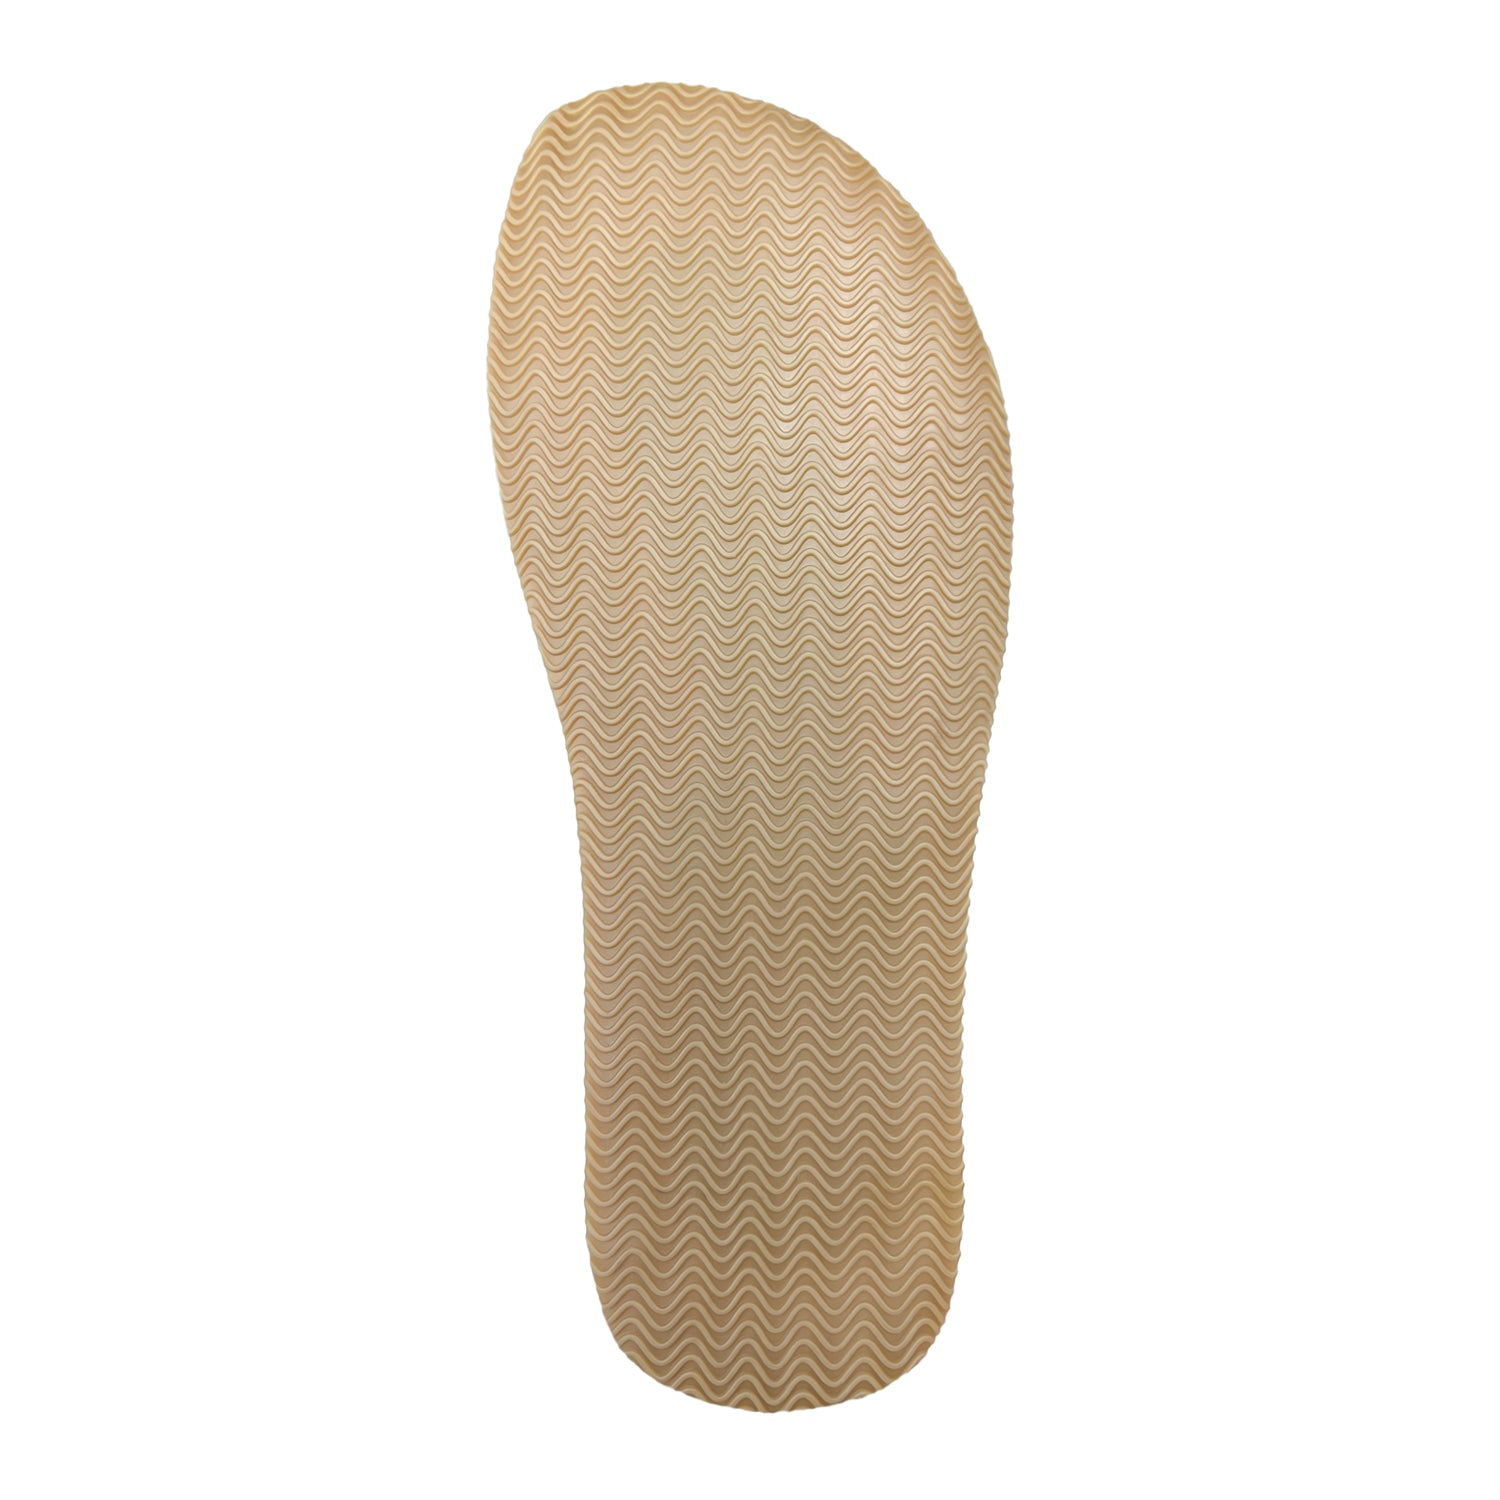 A beige Ursus Canvas shoe insole by Bearfoot with a wavy, non-slip texture and minimalist design, perfect for training sneaker strength athletes.